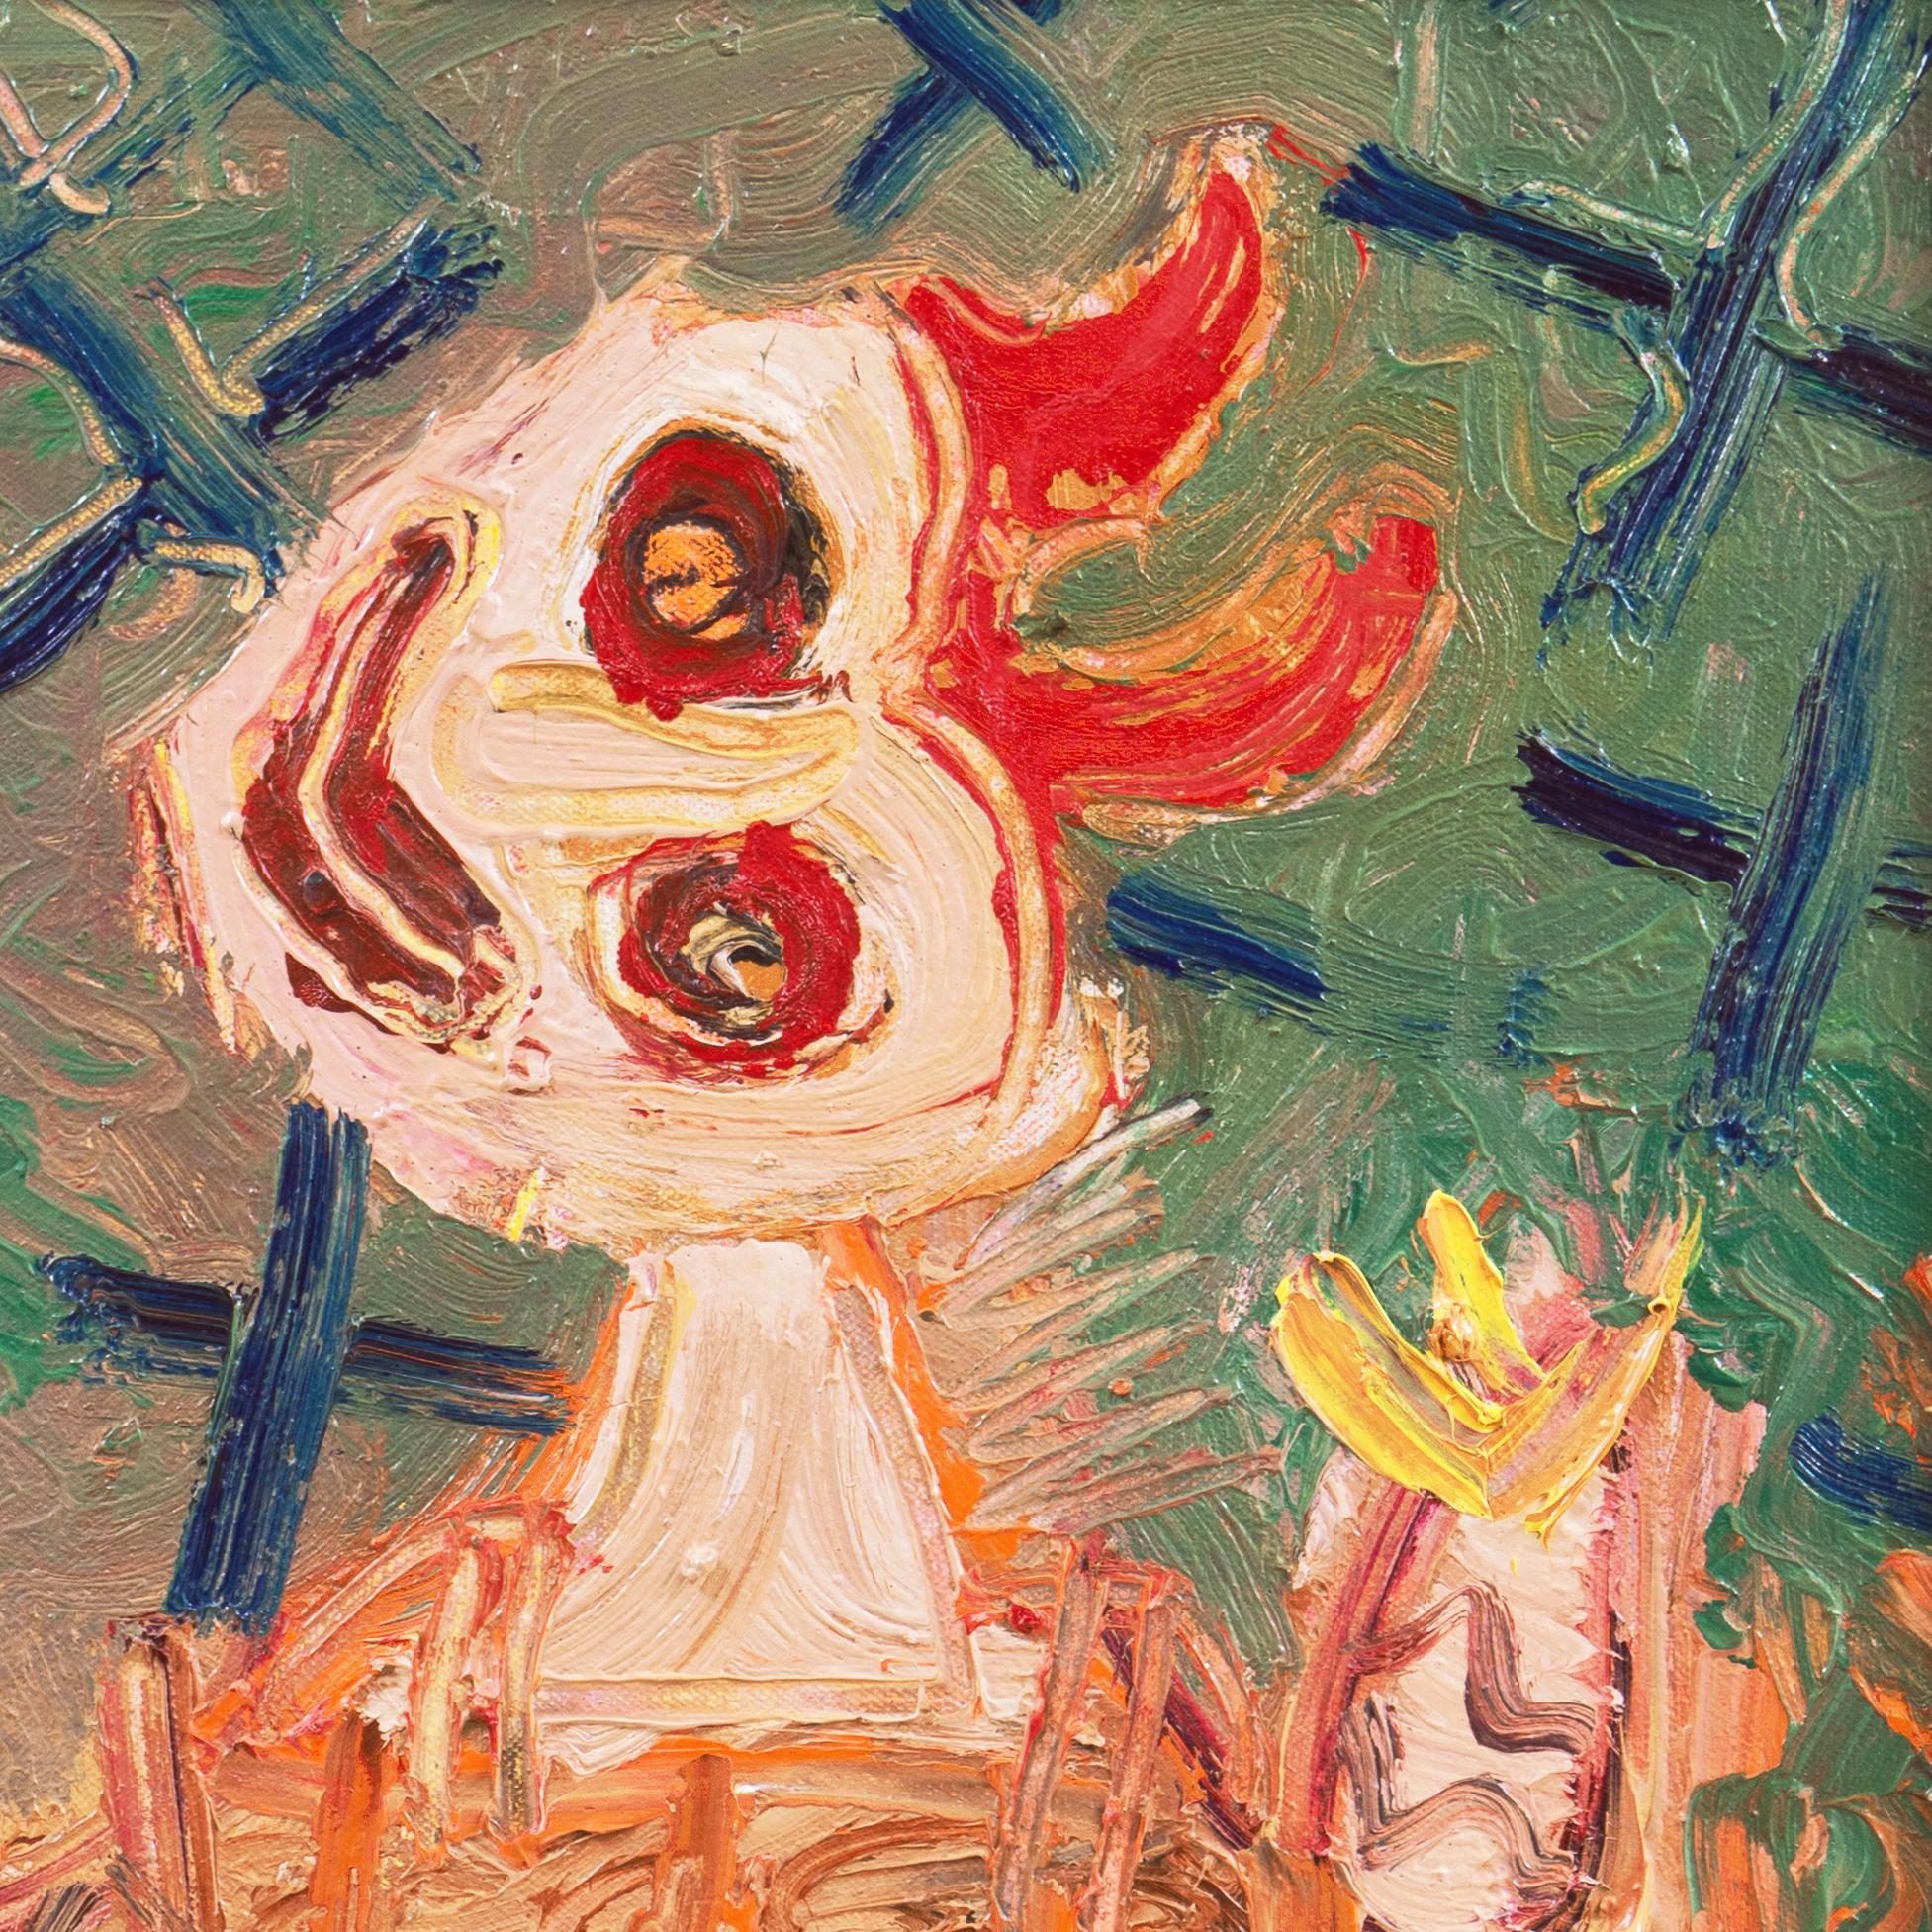 A dynamic oil showing a horned figure wearing red trousers by this well-listed American Expressionist. 

Exhibition labels, New York Times review and additional documentation accompany the piece.

Bill Barrell was born in London, England in 1932.